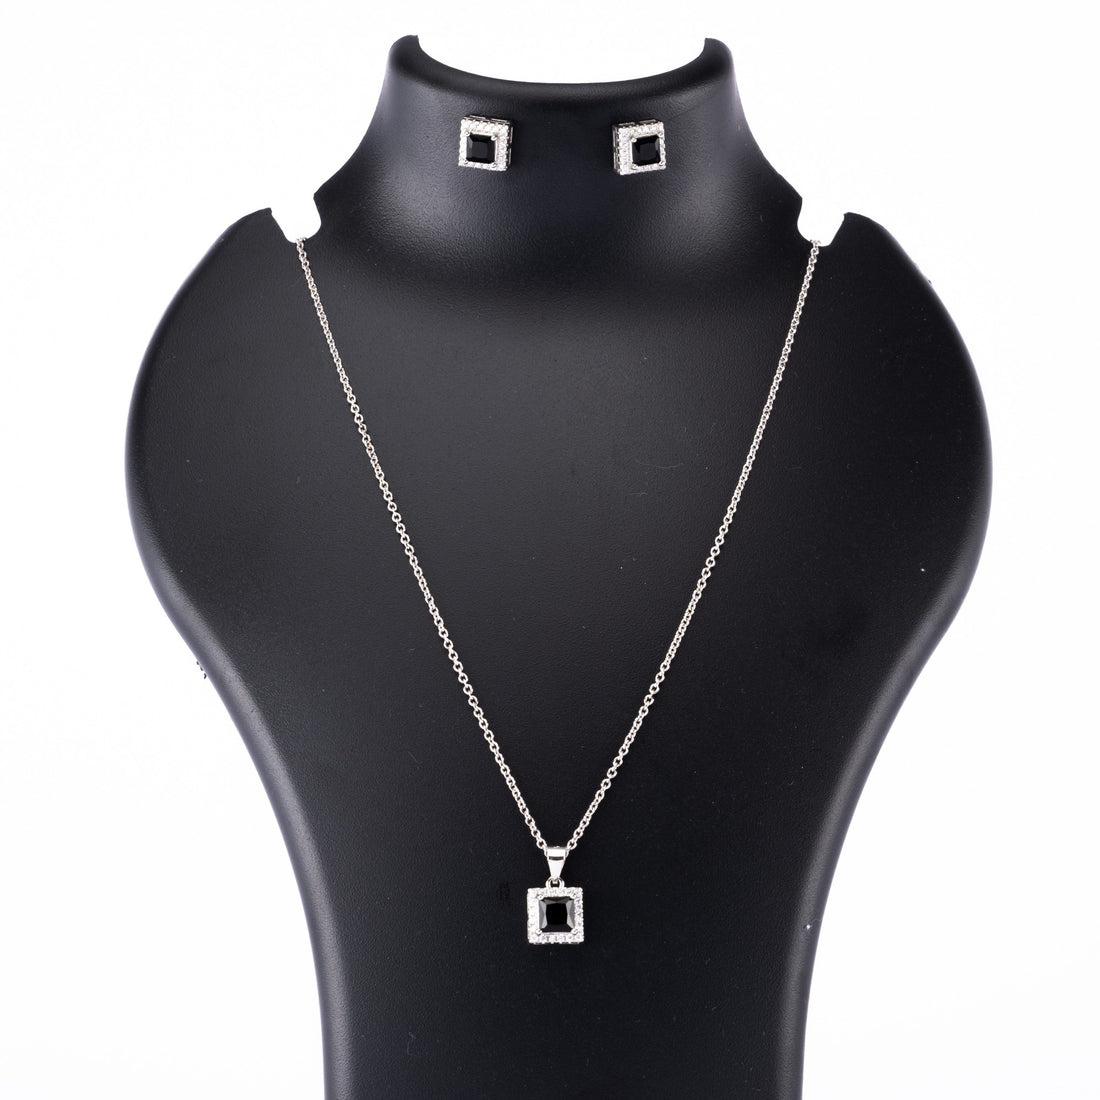 Silver set Chain square pendant and earrings with black stones for women